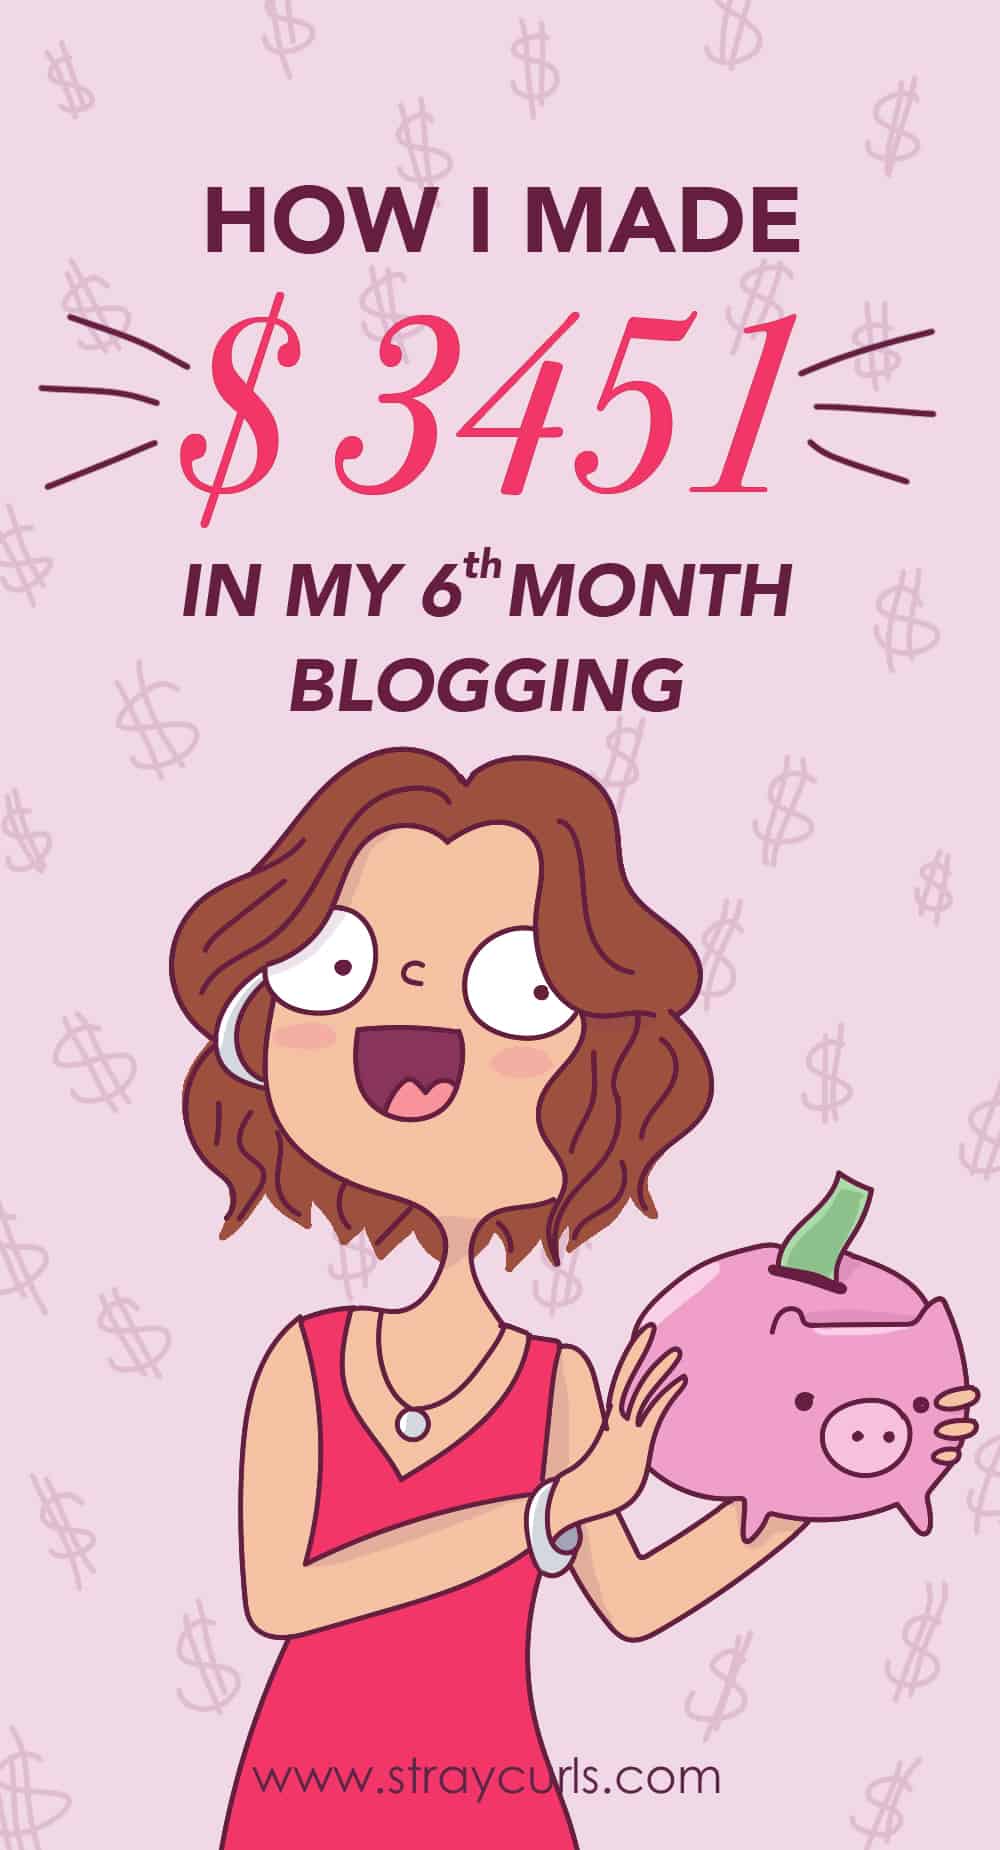 Read my blogging income report to learn how I earned $3451 in my sixth month blogging! Learn how you can make money blogging! This includes some great tips to start a blog, get more blog traffic and make money. #makemoneyonline #blogging #blogger #newblog #girlboss